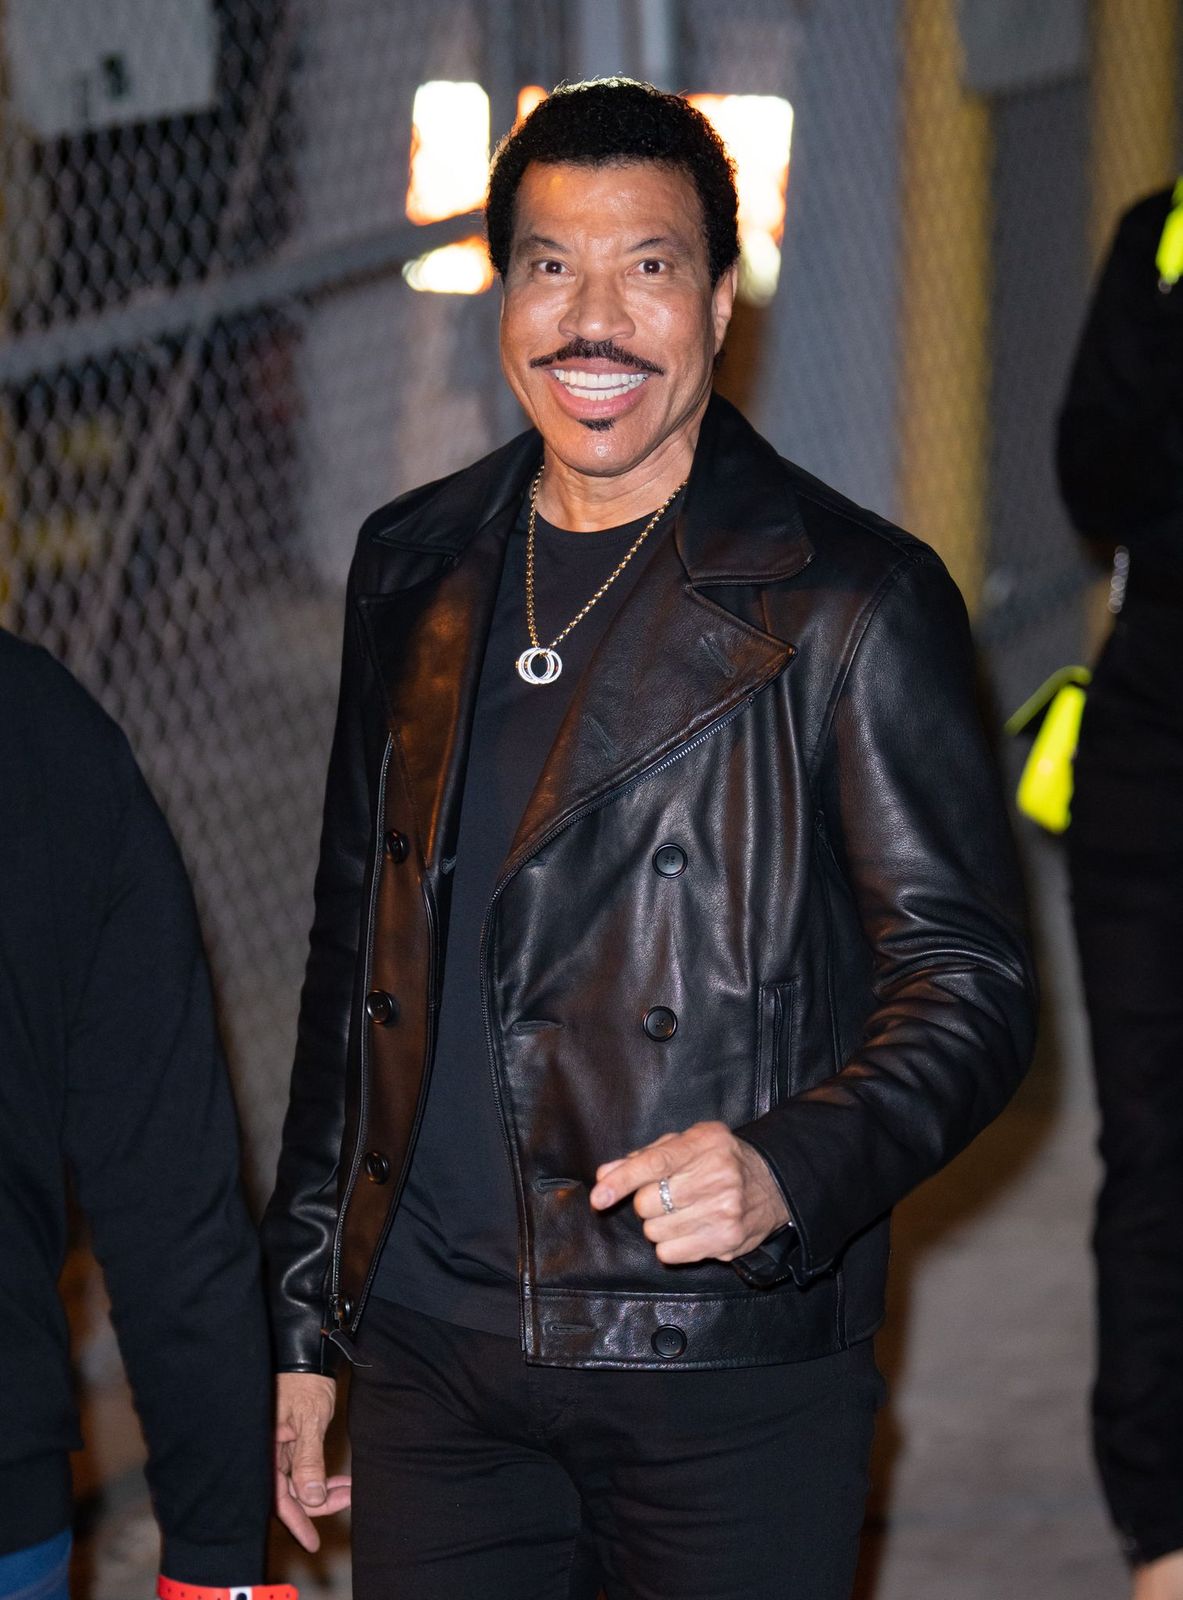 Lionel Richie at "Jimmy Kimmel Live" on February 12, 2020, in Los Angeles, California | Photo: RB/Bauer-Griffin/GC Images/Getty Images